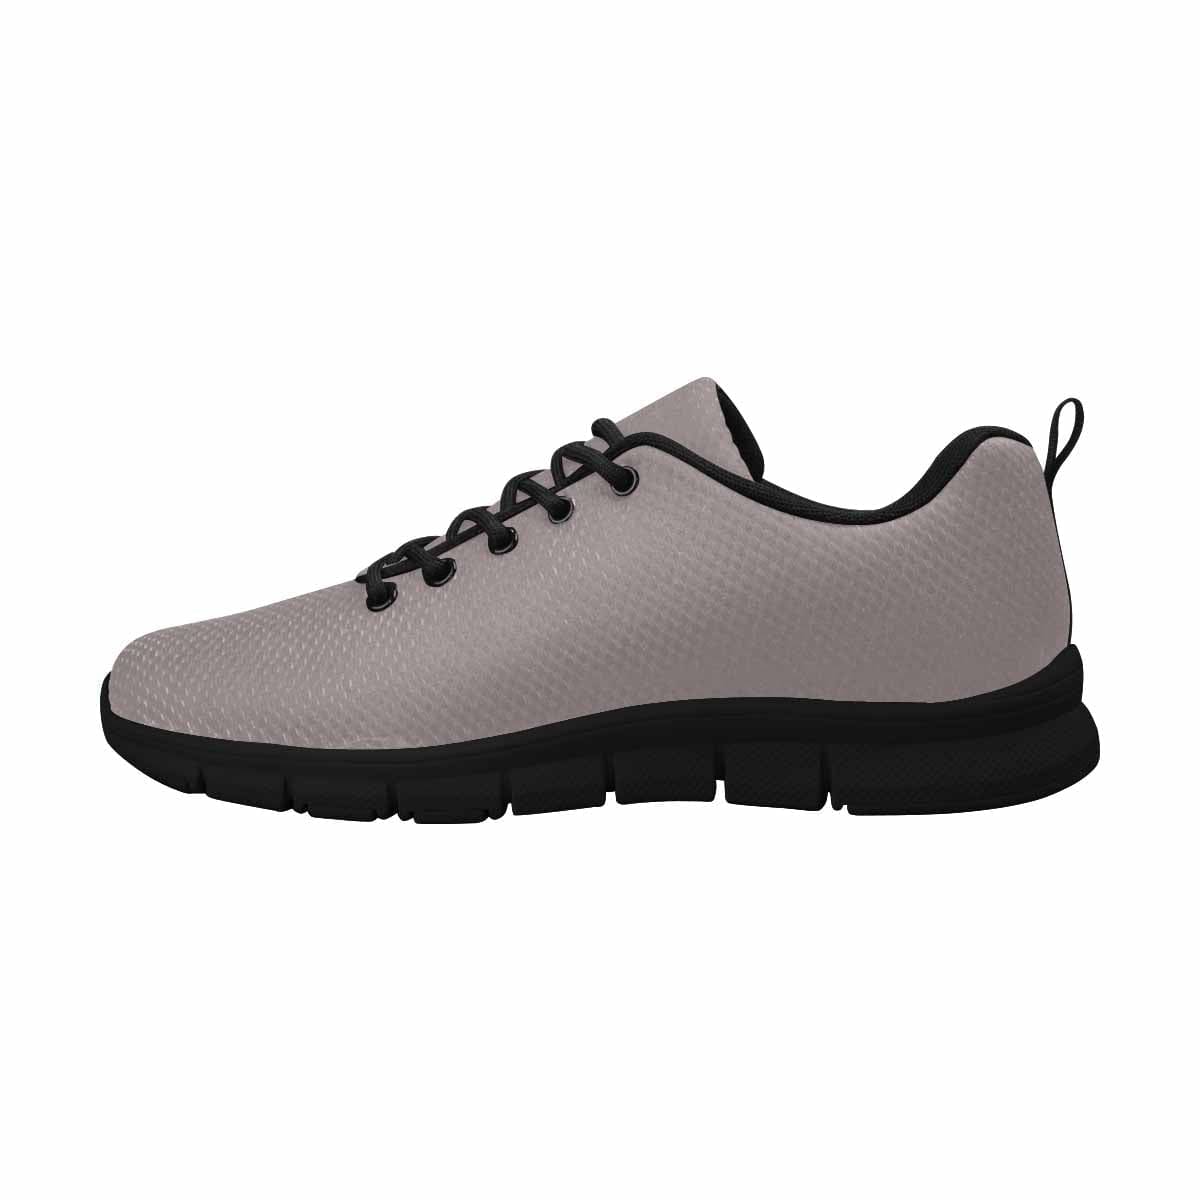 Sneakers For Men Coffee Brown - Canvas Mesh Athletic Running Shoes - Mens